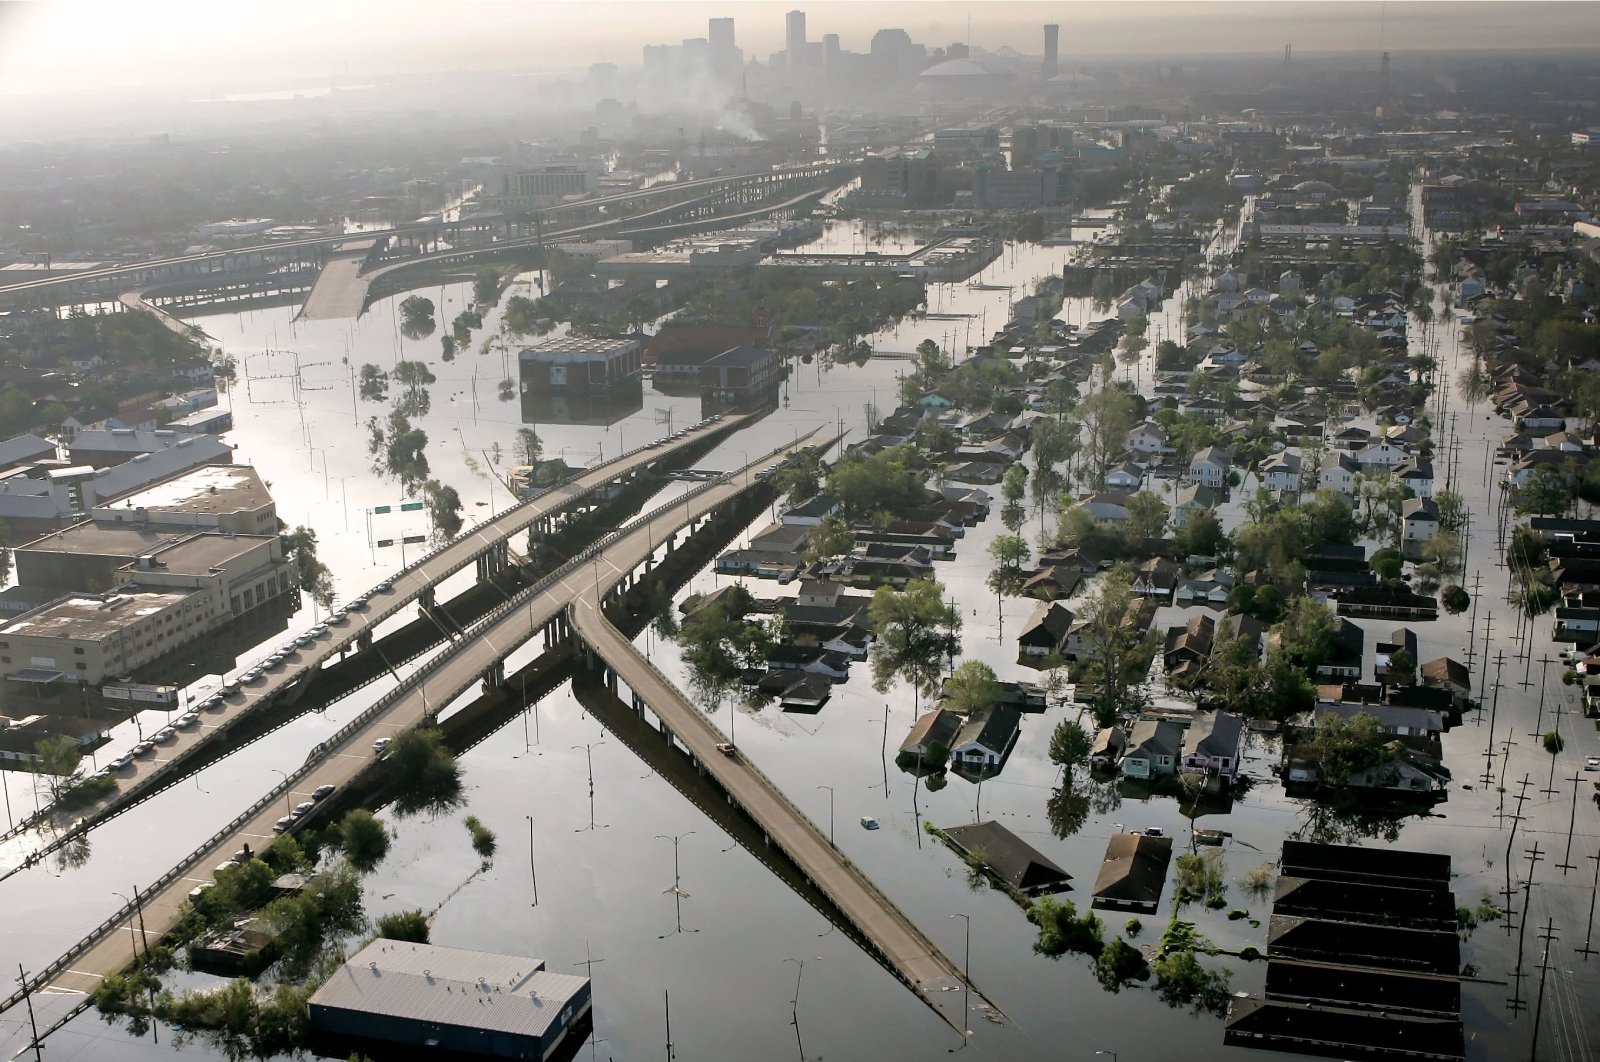 Floodwaters from Hurricane Katrina fill the streets near downtown New Orleans, Louisiana, U.S., Aug. 30, 2005. (AP Photo)